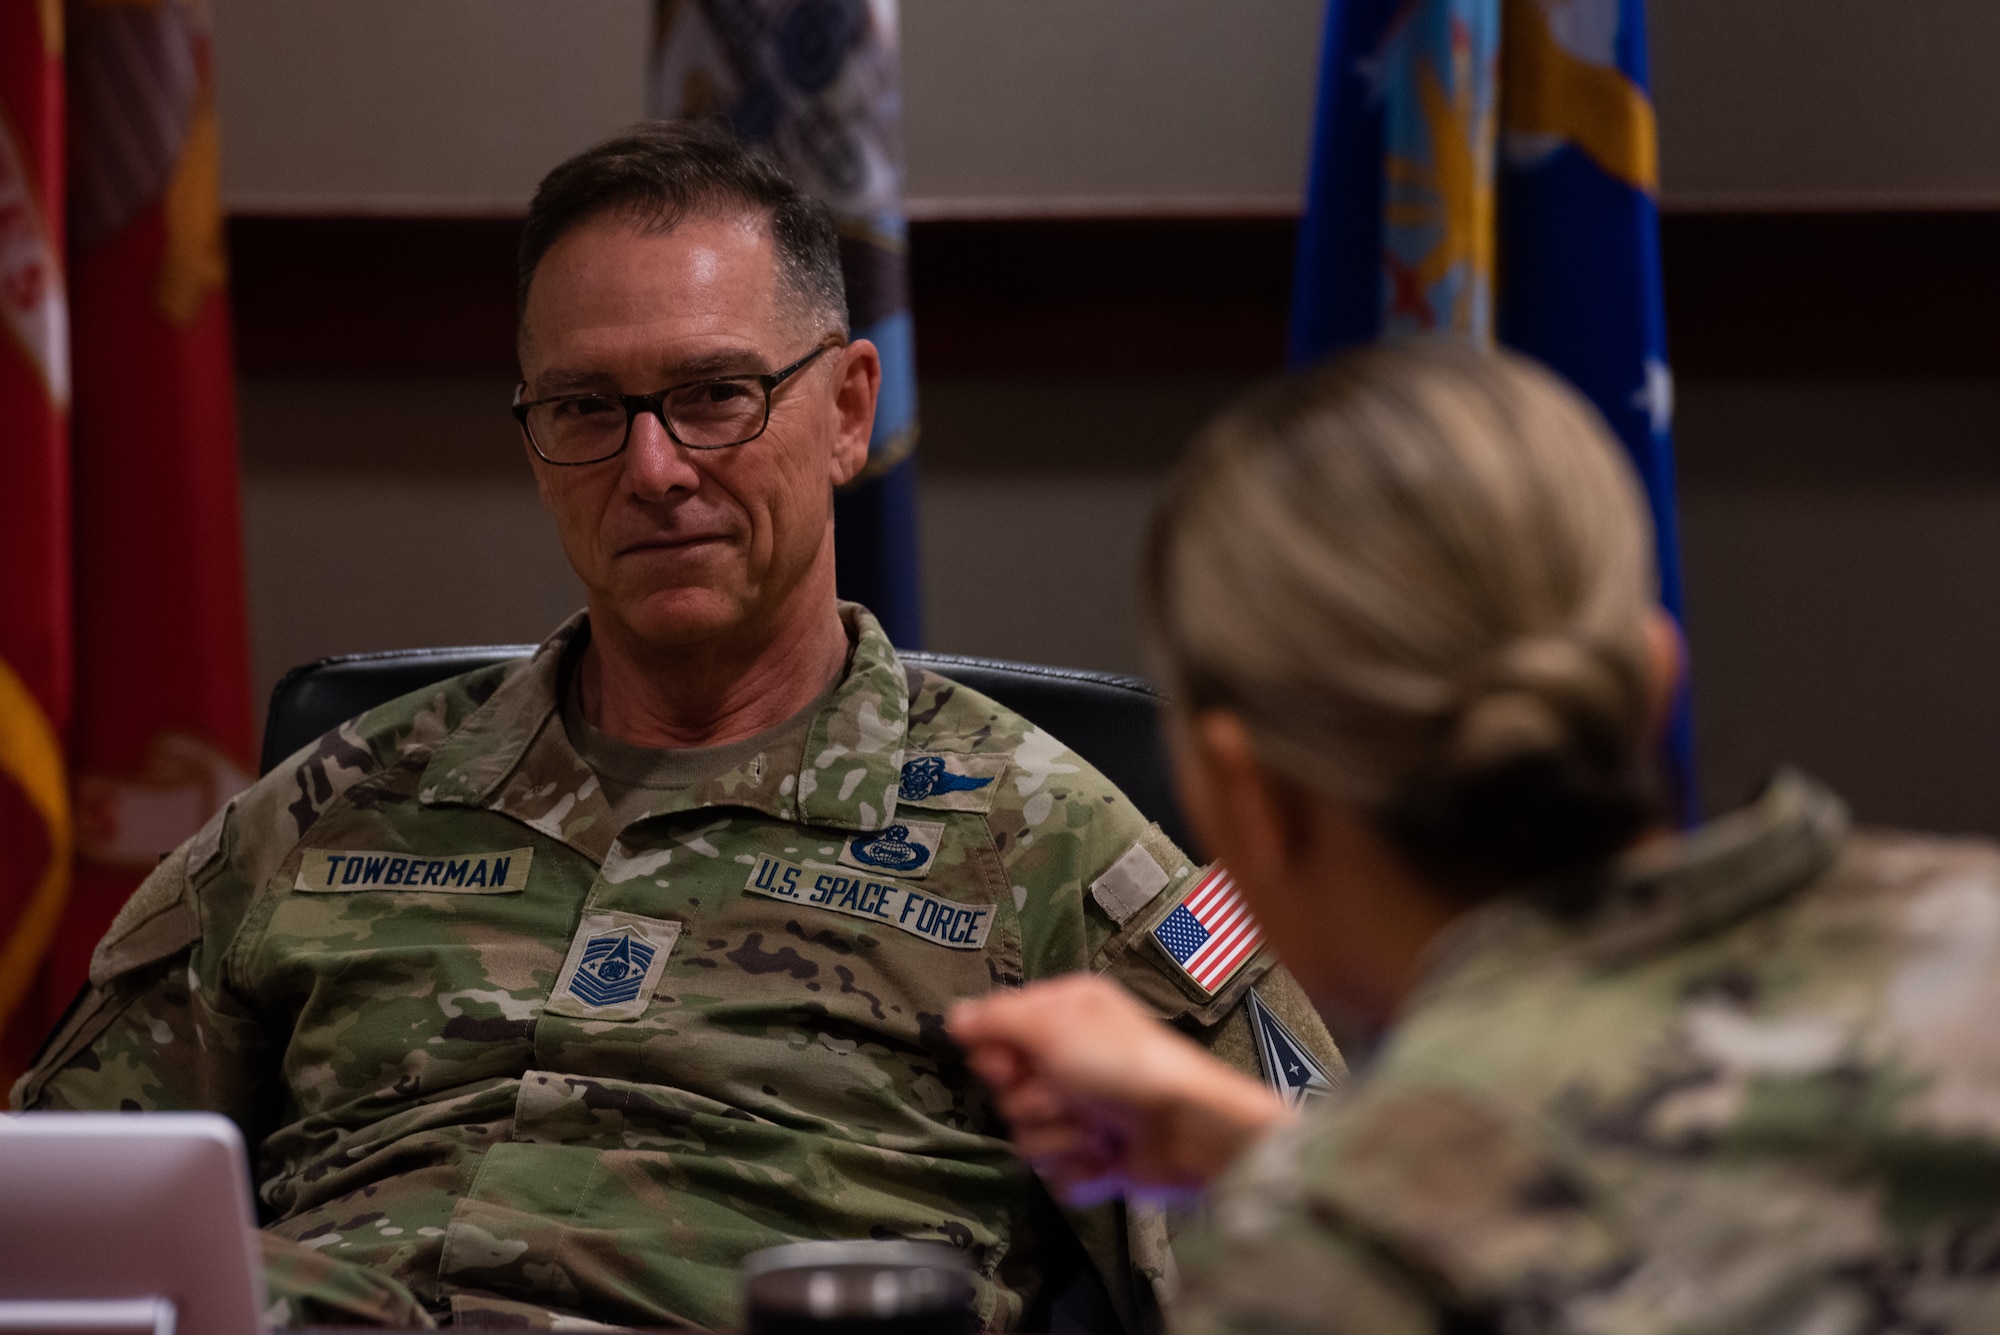 Chief Master Sergeant of the Space Force Roger A. Towberman sits in a briefing with Chief Master Sergeant Rebecca Arbona, 17th Training Wing command chief, at Goodfellow Air Force Base, Texas, July 8, 2022. Chief Towberman visited Goodfellow to discuss the future of U.S. Space Force intelligence training. (U.S. Air Force photo by Senior Airman Michael Bowman)